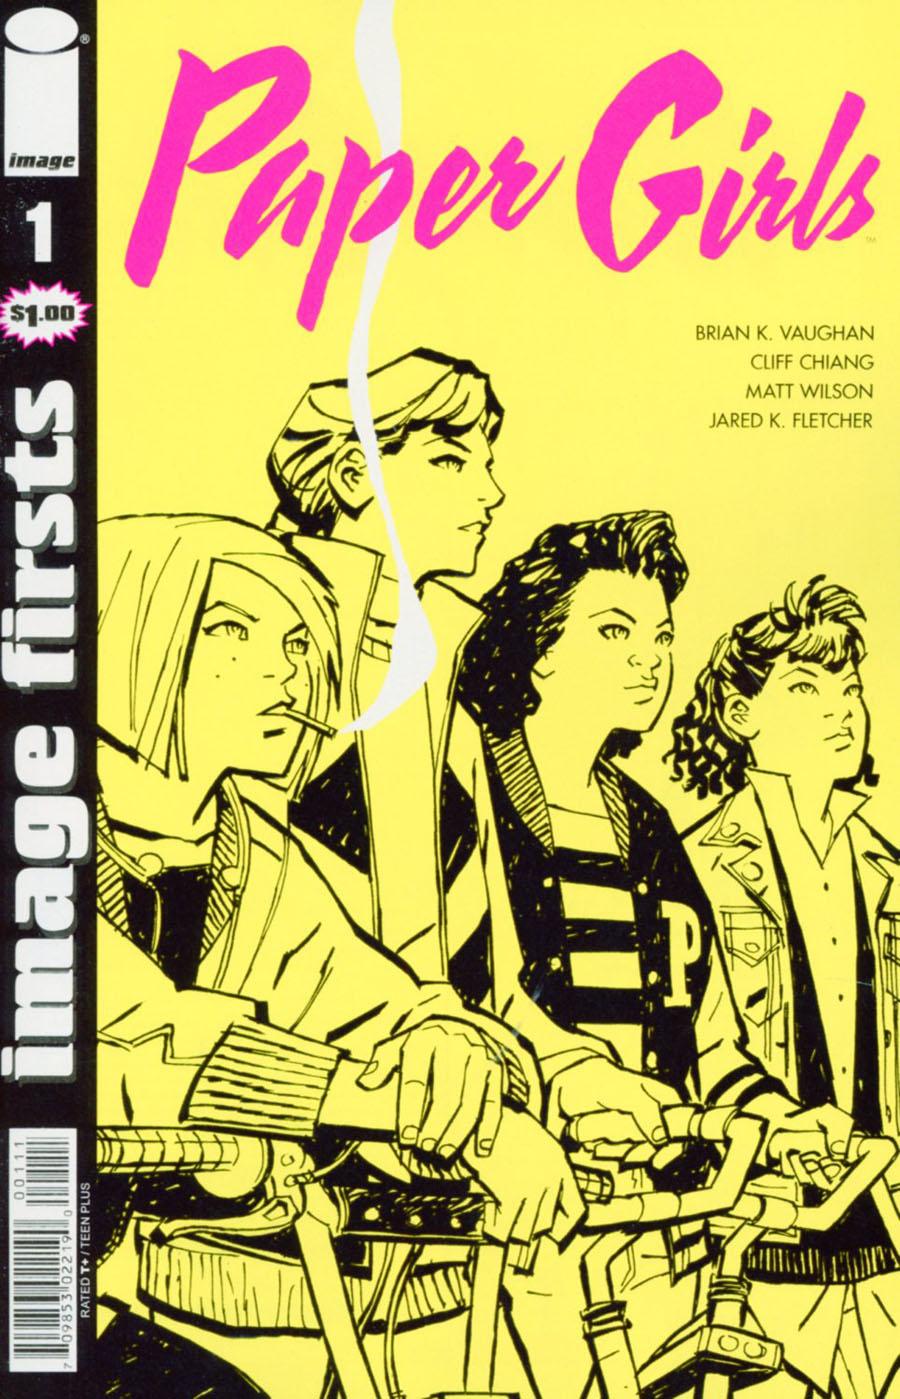 Image Firsts Paper Girls Vol. 1 #1